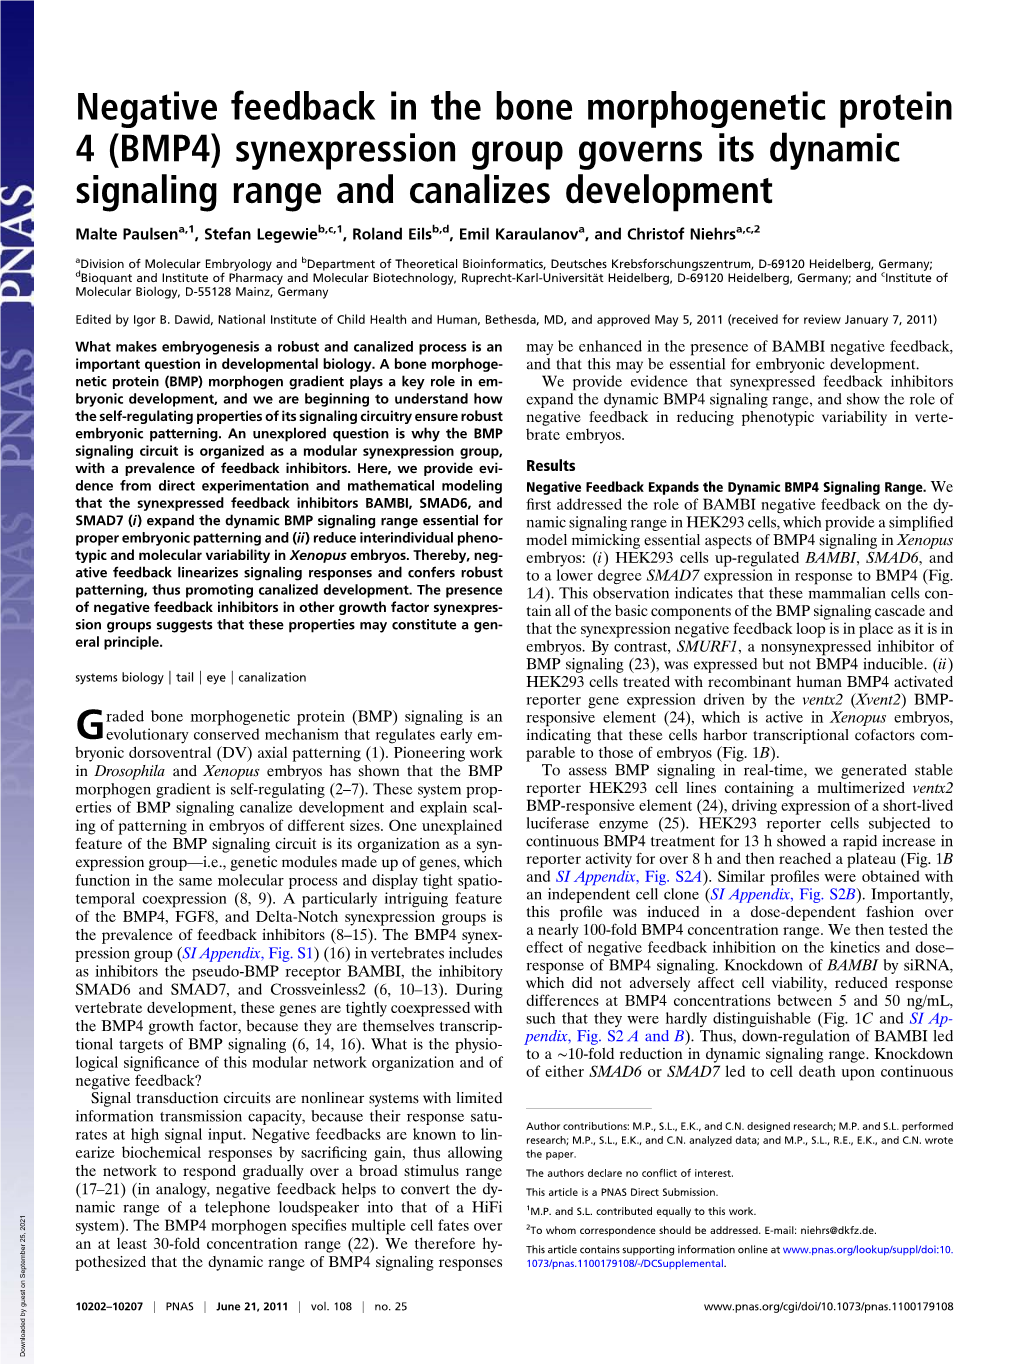 Negative Feedback in the Bone Morphogenetic Protein 4 (BMP4) Synexpression Group Governs Its Dynamic Signaling Range and Canalizes Development